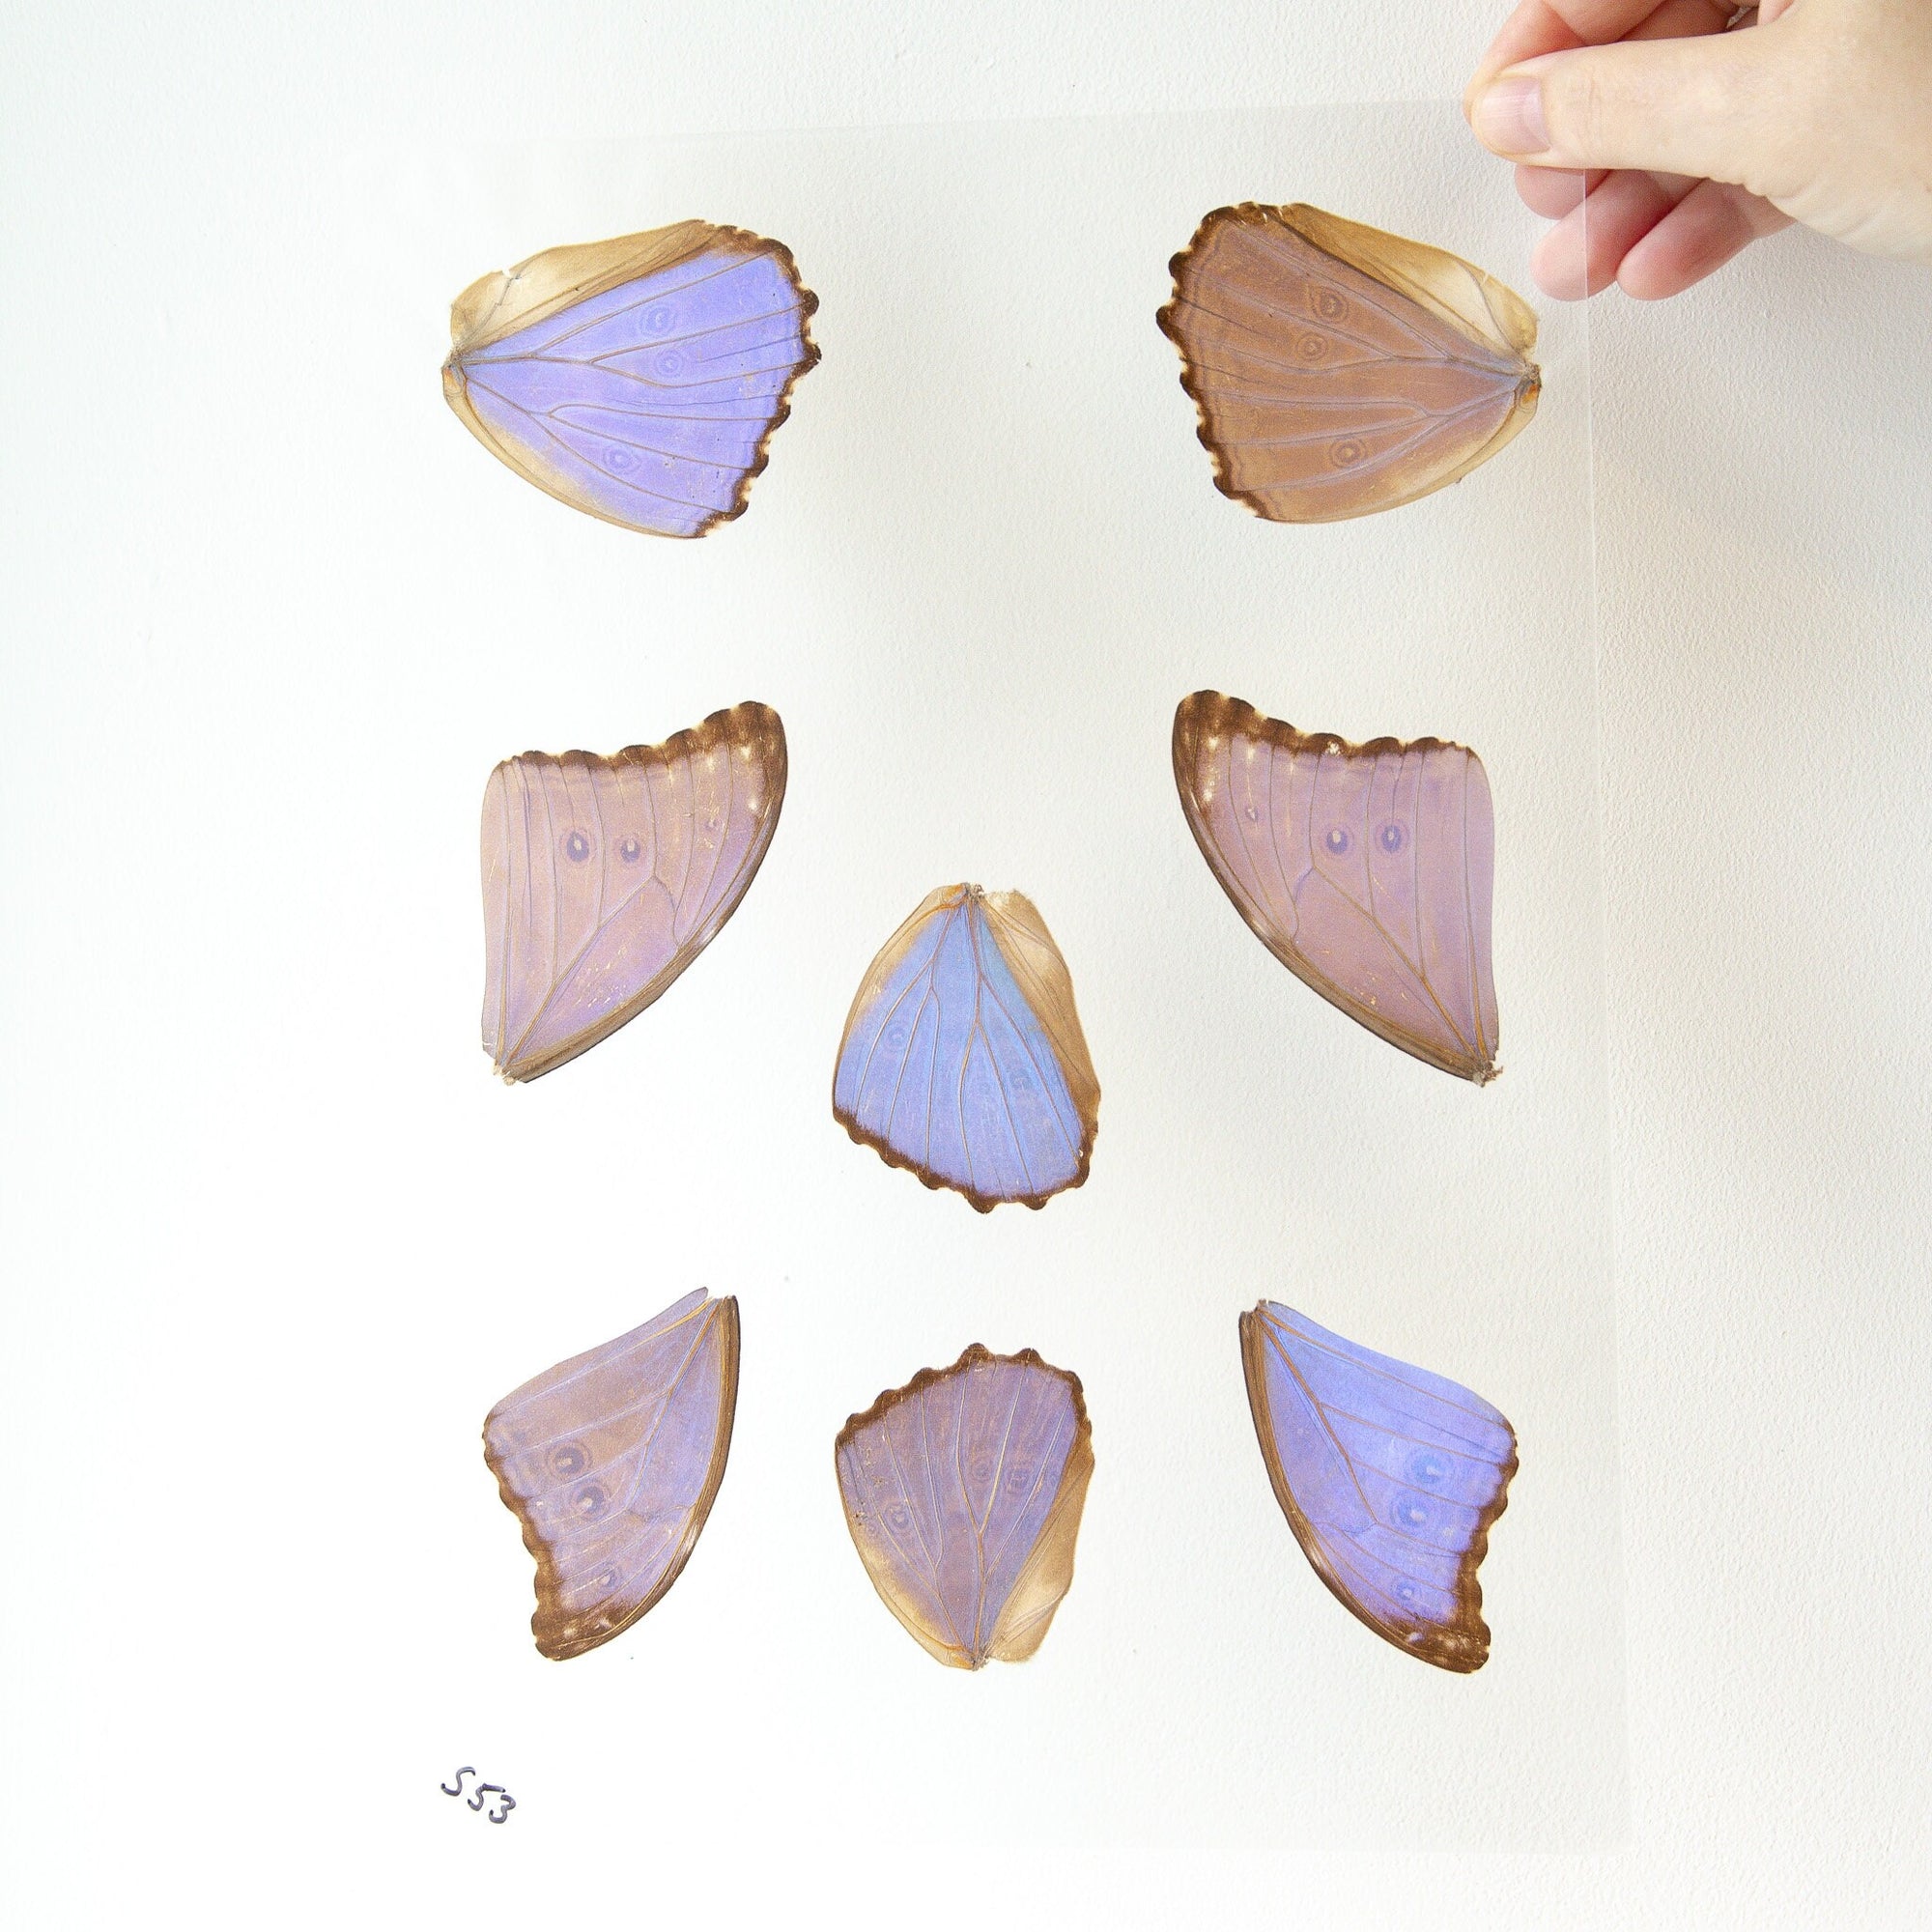 Butterfly Wings GLOSSY LAMINATED SHEET Real Ethically Sourced Specimens Moths Butterflies Wings for Art -- S53